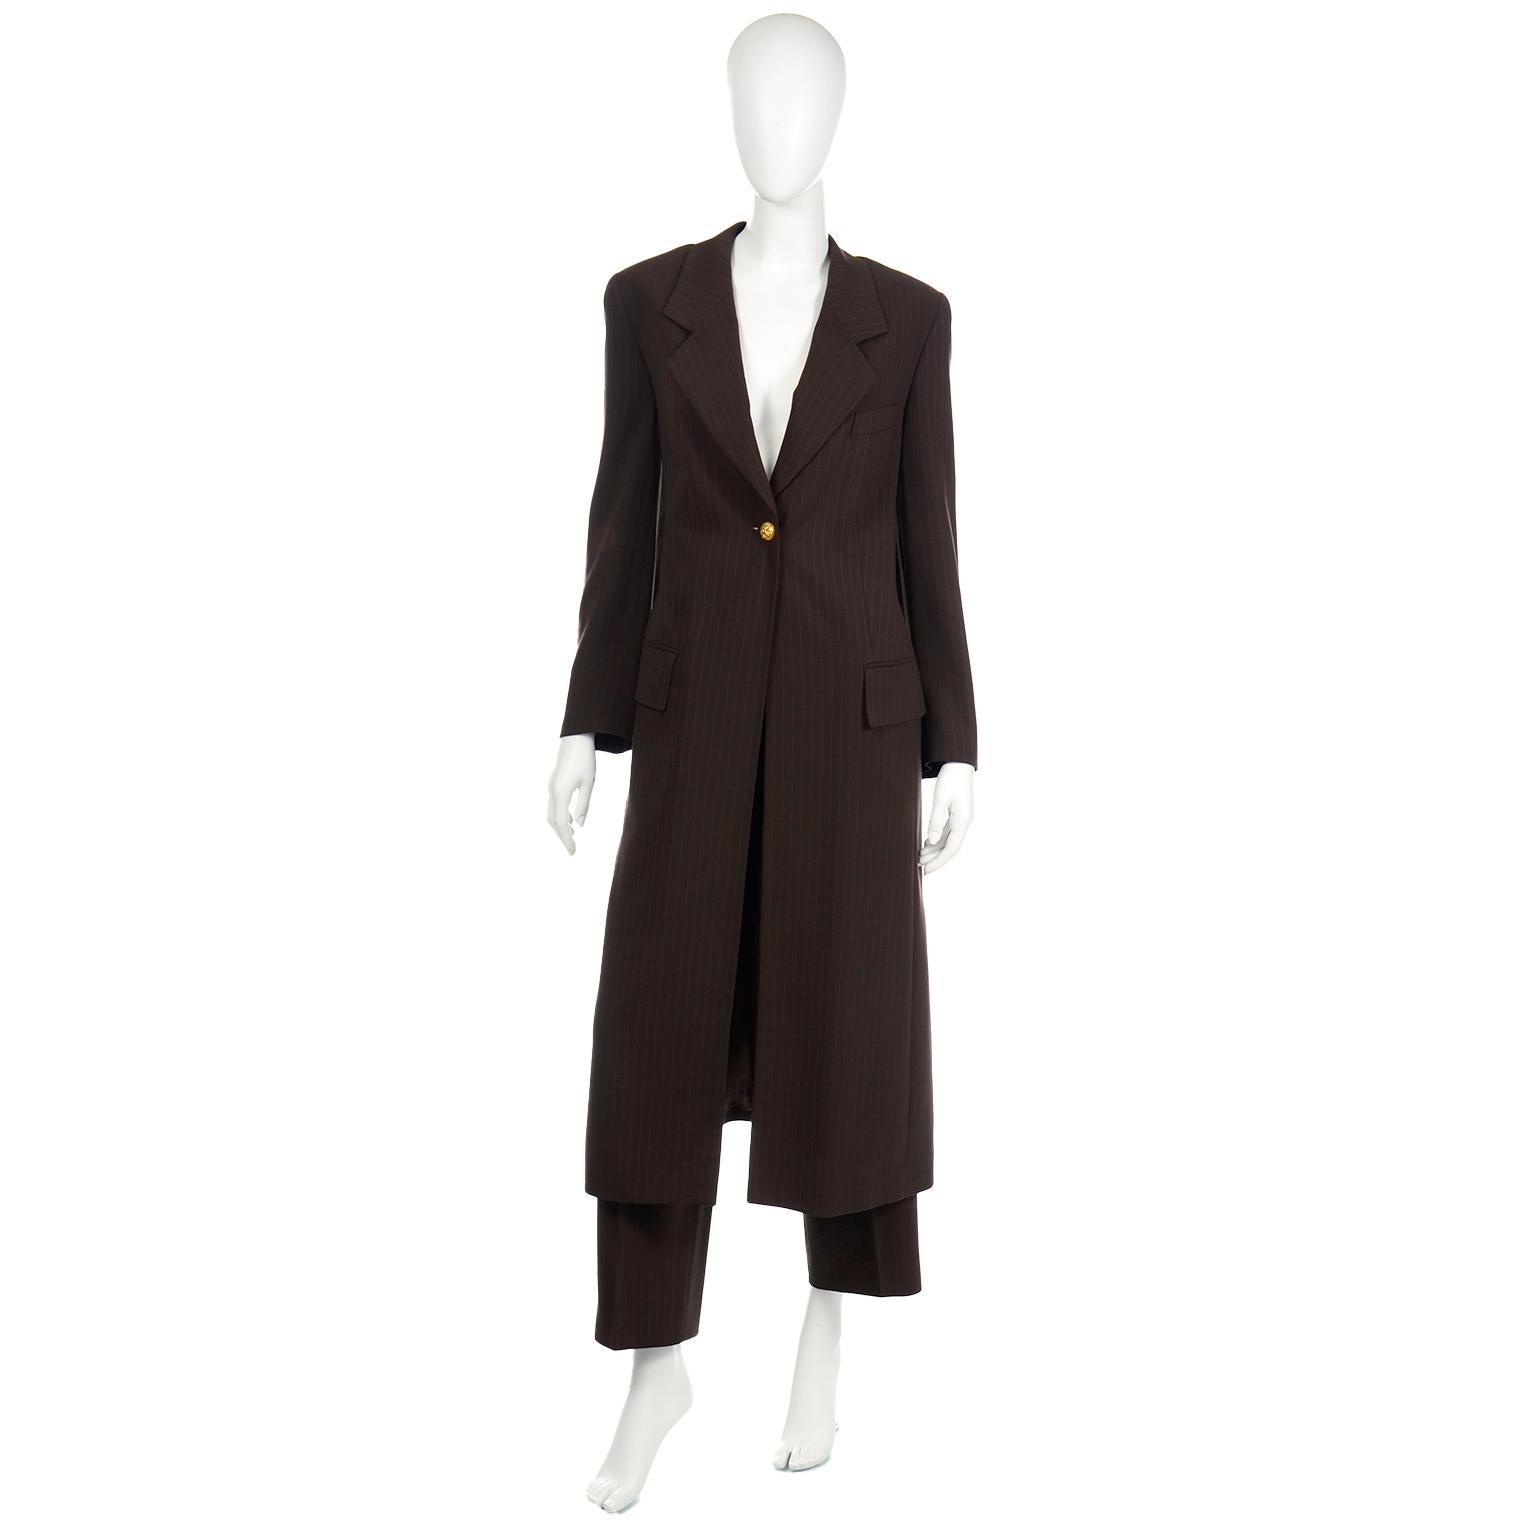 This sophisticated vintage Louis Féraud brown pinstripe pant suit includes a stunning blazer style coat and a pair of pleated trousers. This outfit can be worn as a suit or you can break it up and have two great separate pieces to wear with other